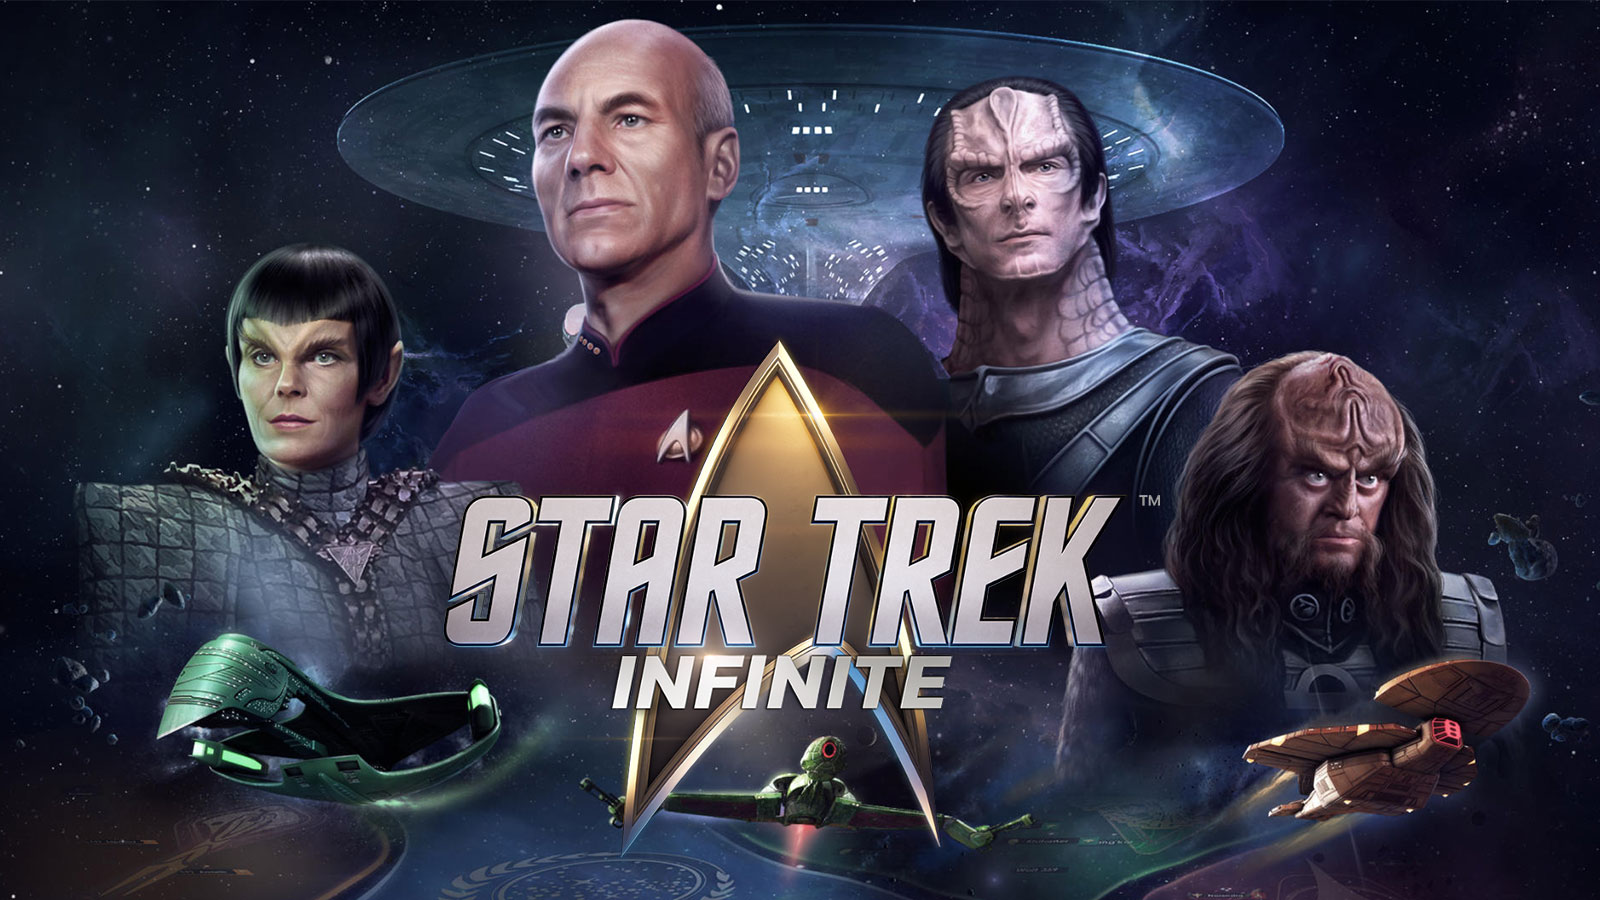 Star Trek: Infinite: An epic strategy game that will keep you busy for hours — here’s why